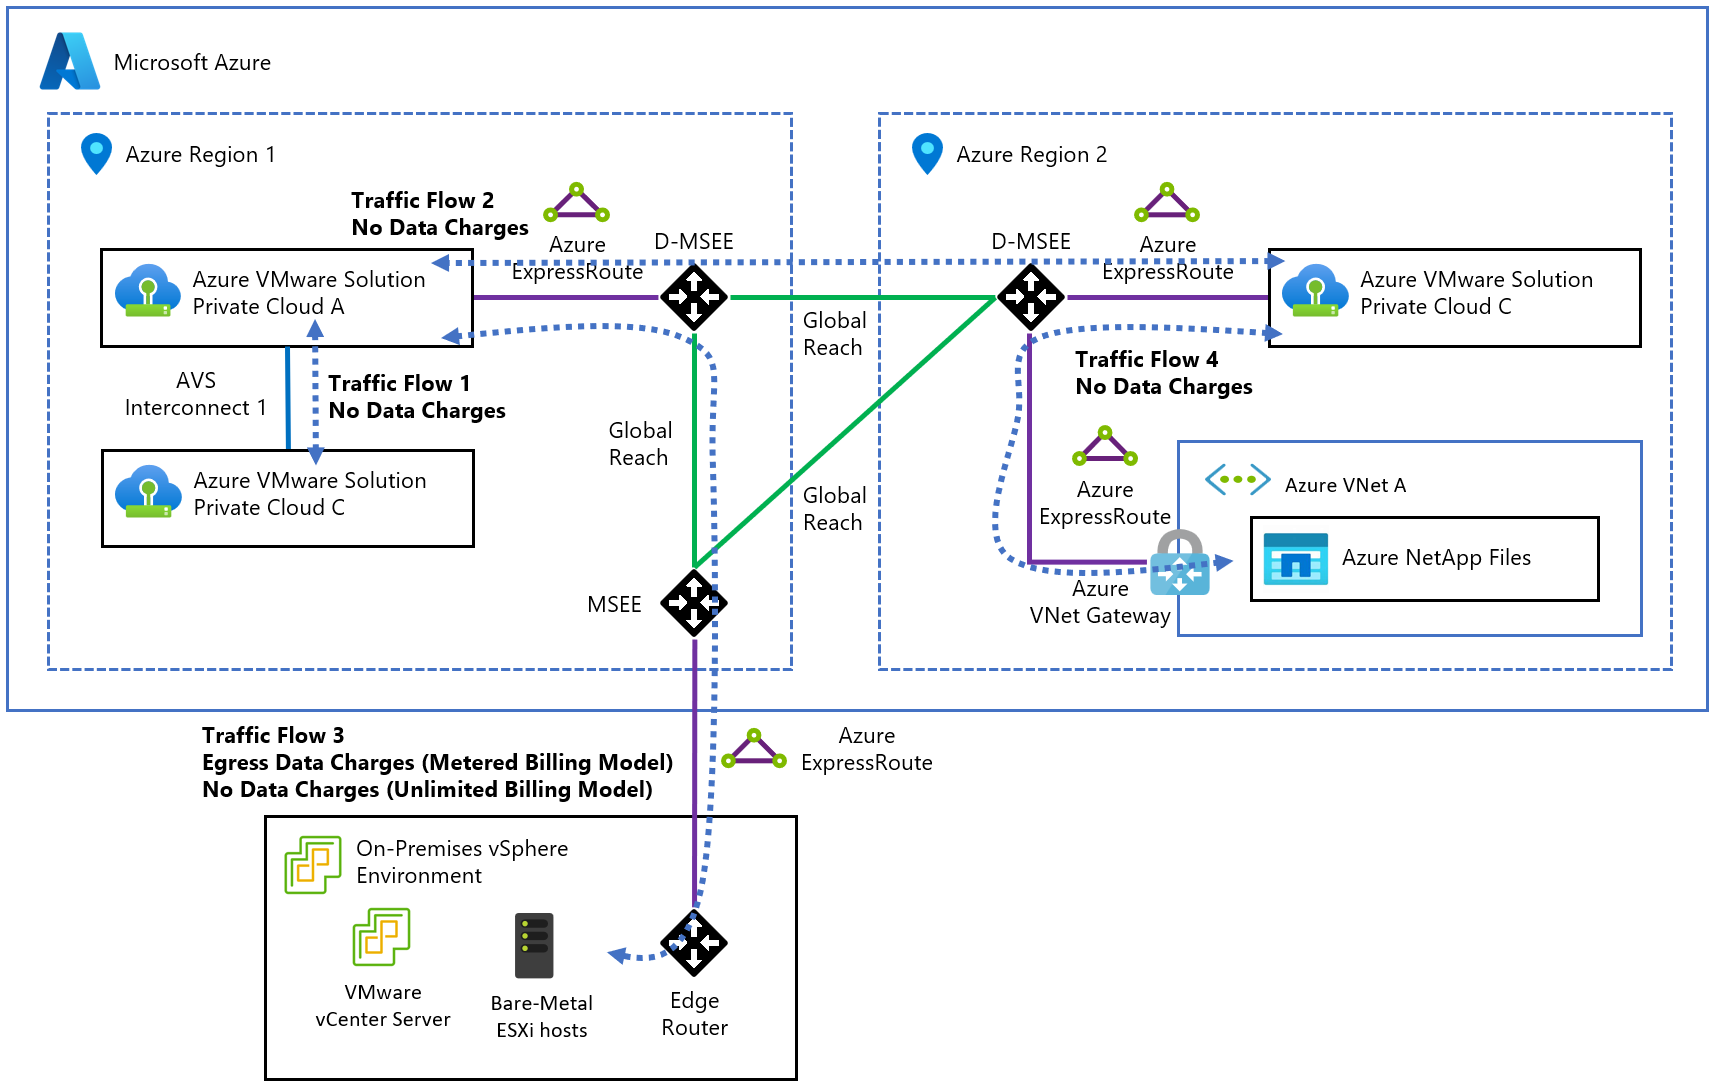 Diagram showing Azure VMware Solution data transfer charges.